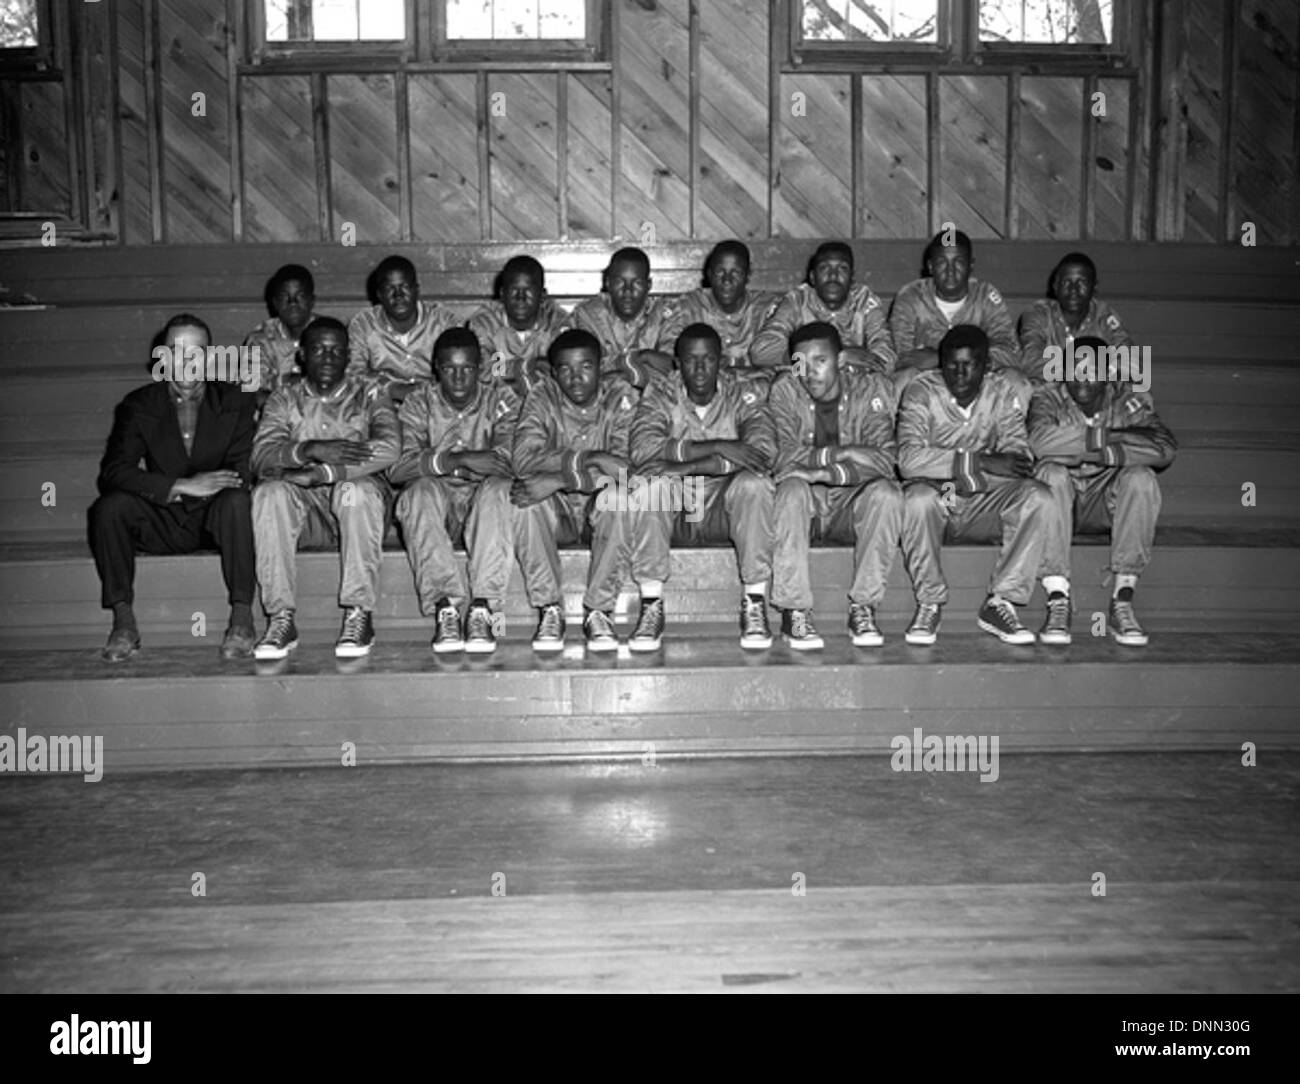 Lincoln High School basketball team in Tallahassee, Florida Stock Photo